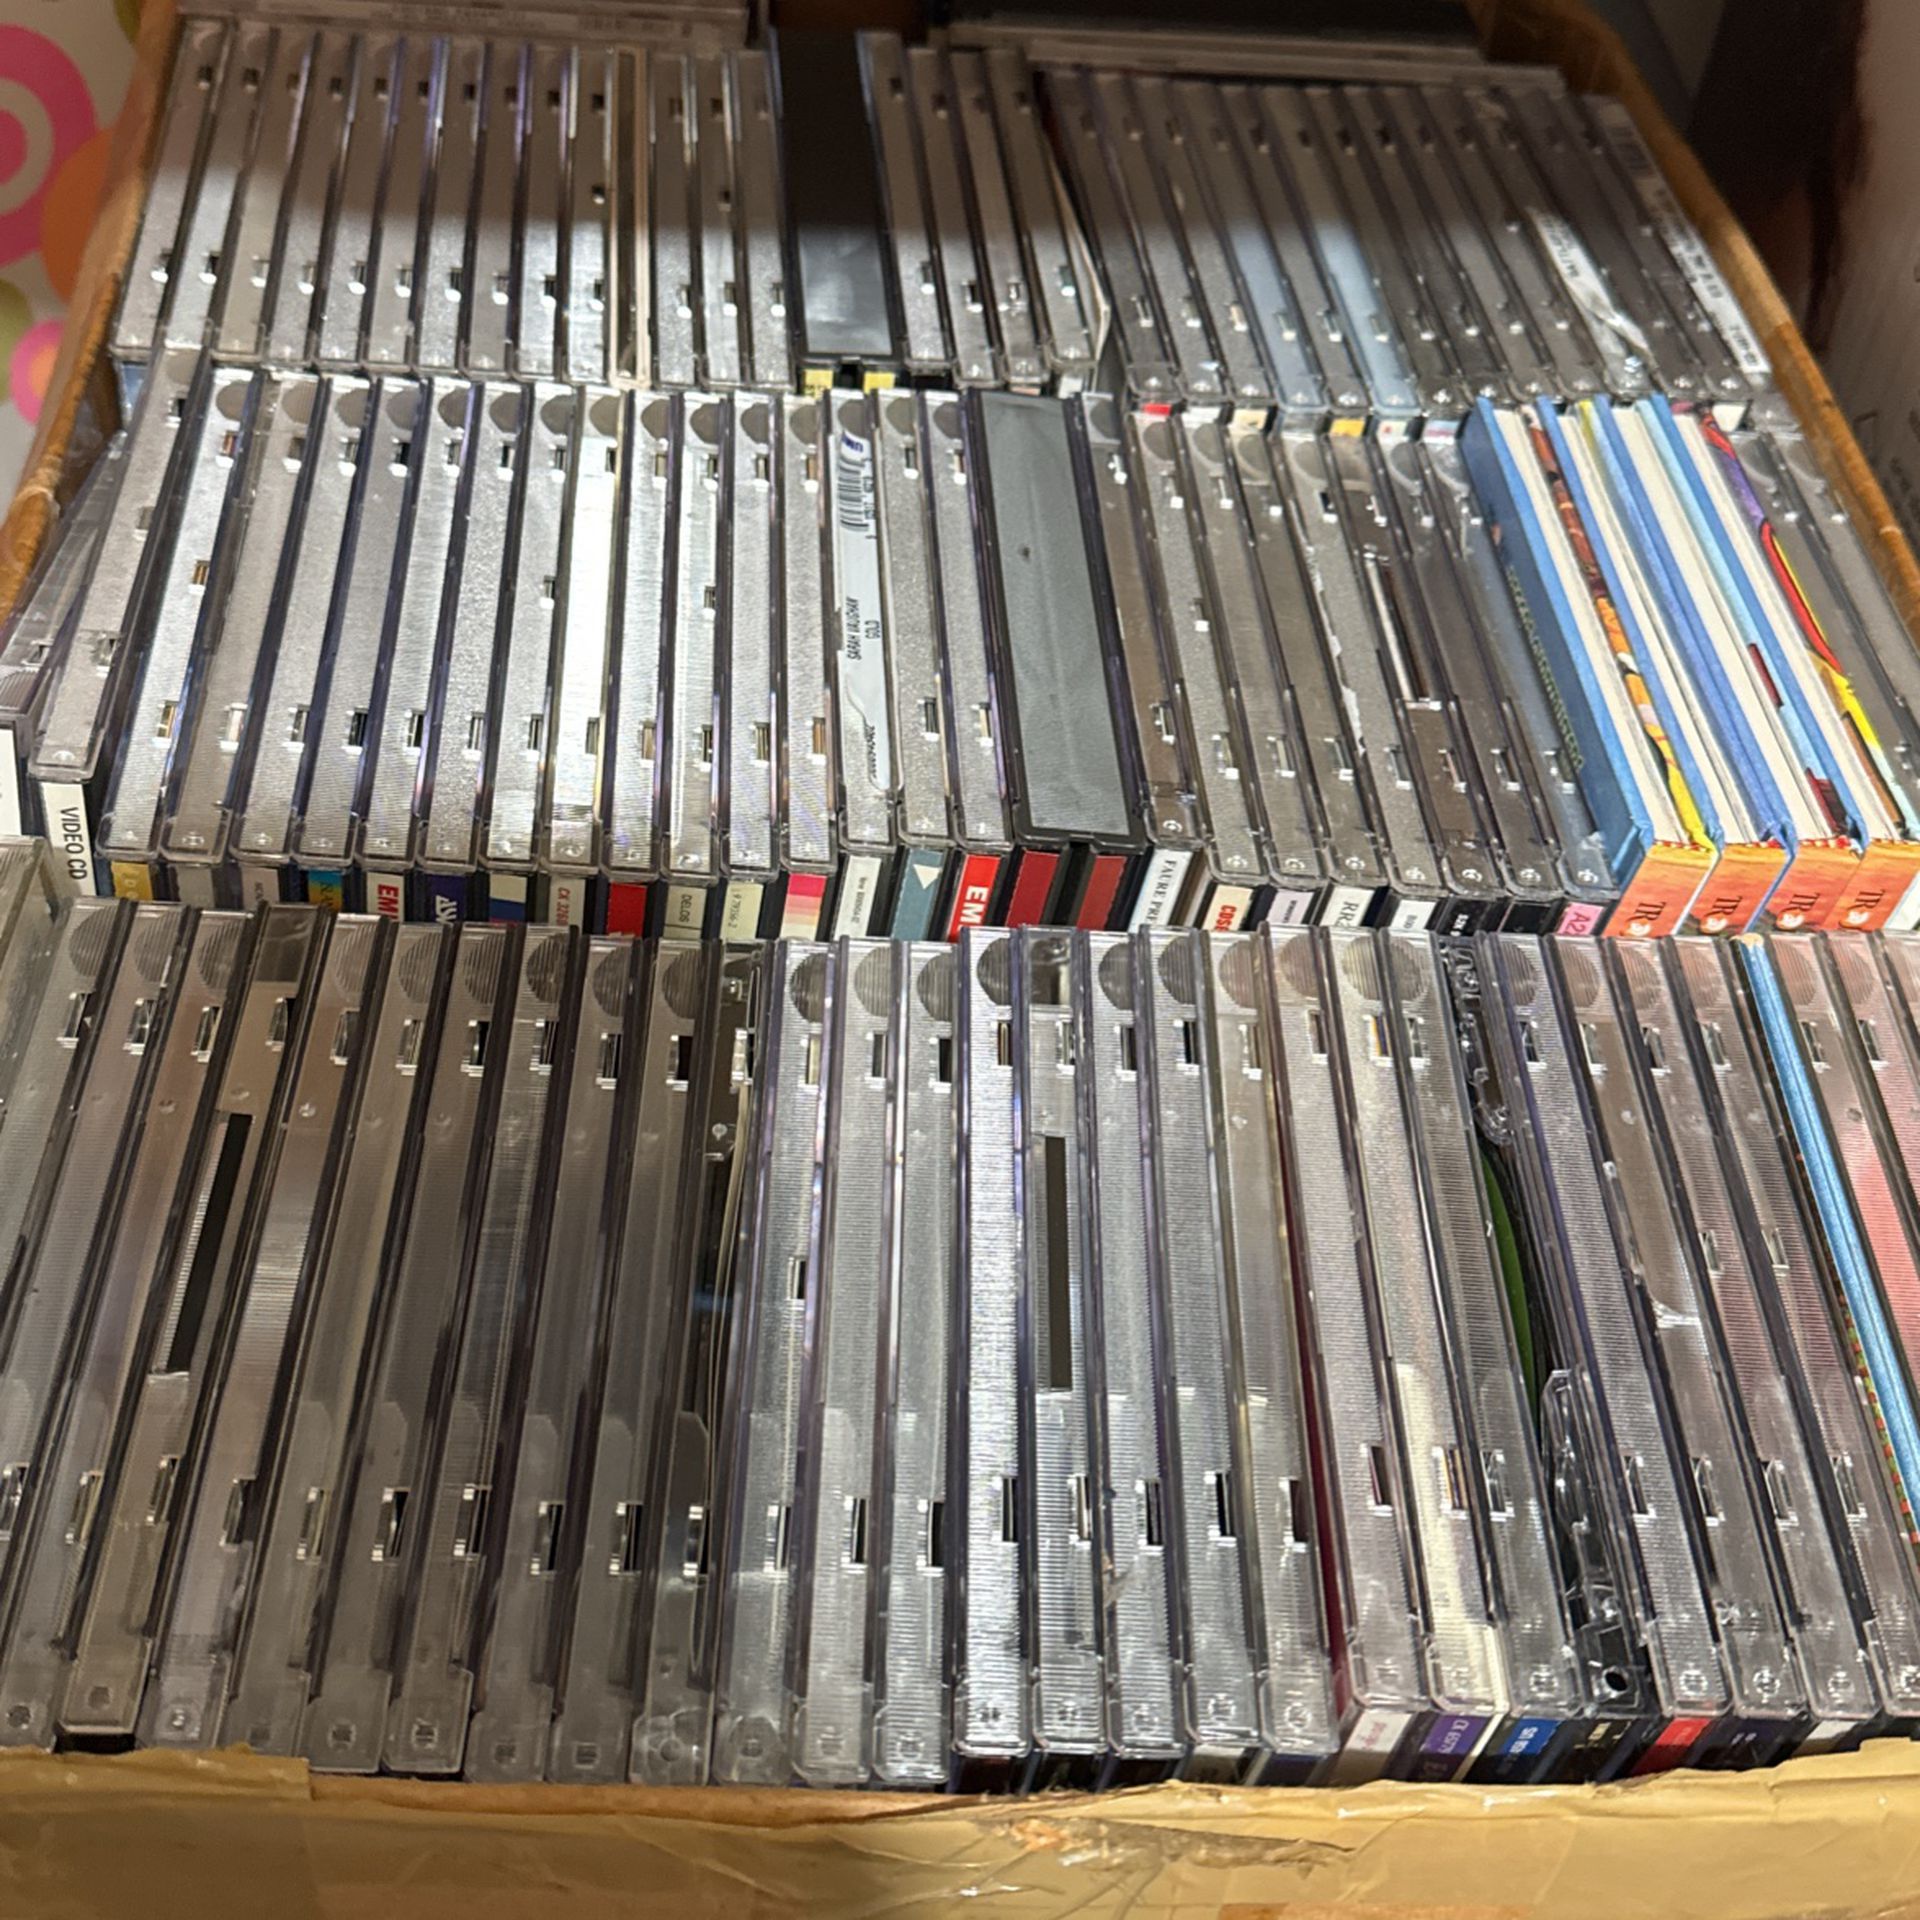 8 Boxes Of Music CD’s All For One Price